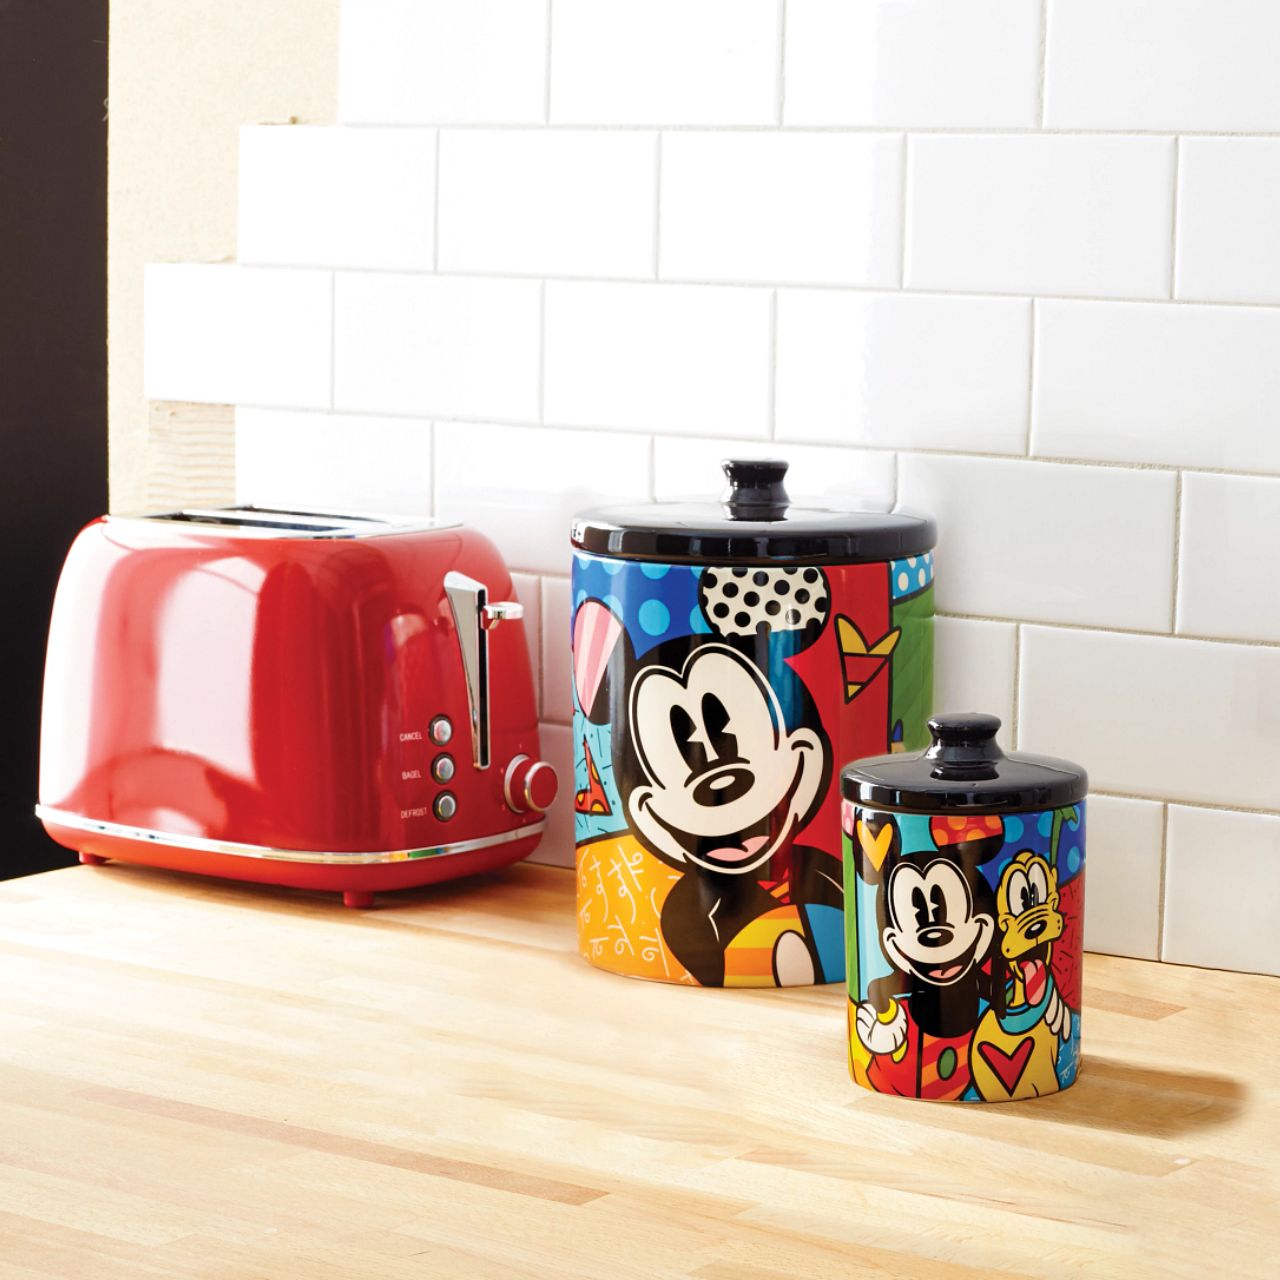 Mickey Mouse and Pluto Cookie Jar Small  Mickey Mouse and his best pal Pluto are so full of life and love in this cookie jar canister designed by Romero Britto. Bright, bold, and full of friendship, it will be hard to avoid a sweet treat from such a sweet duo. Perfect for dog treats, coffee, flour, sugar or cookies.